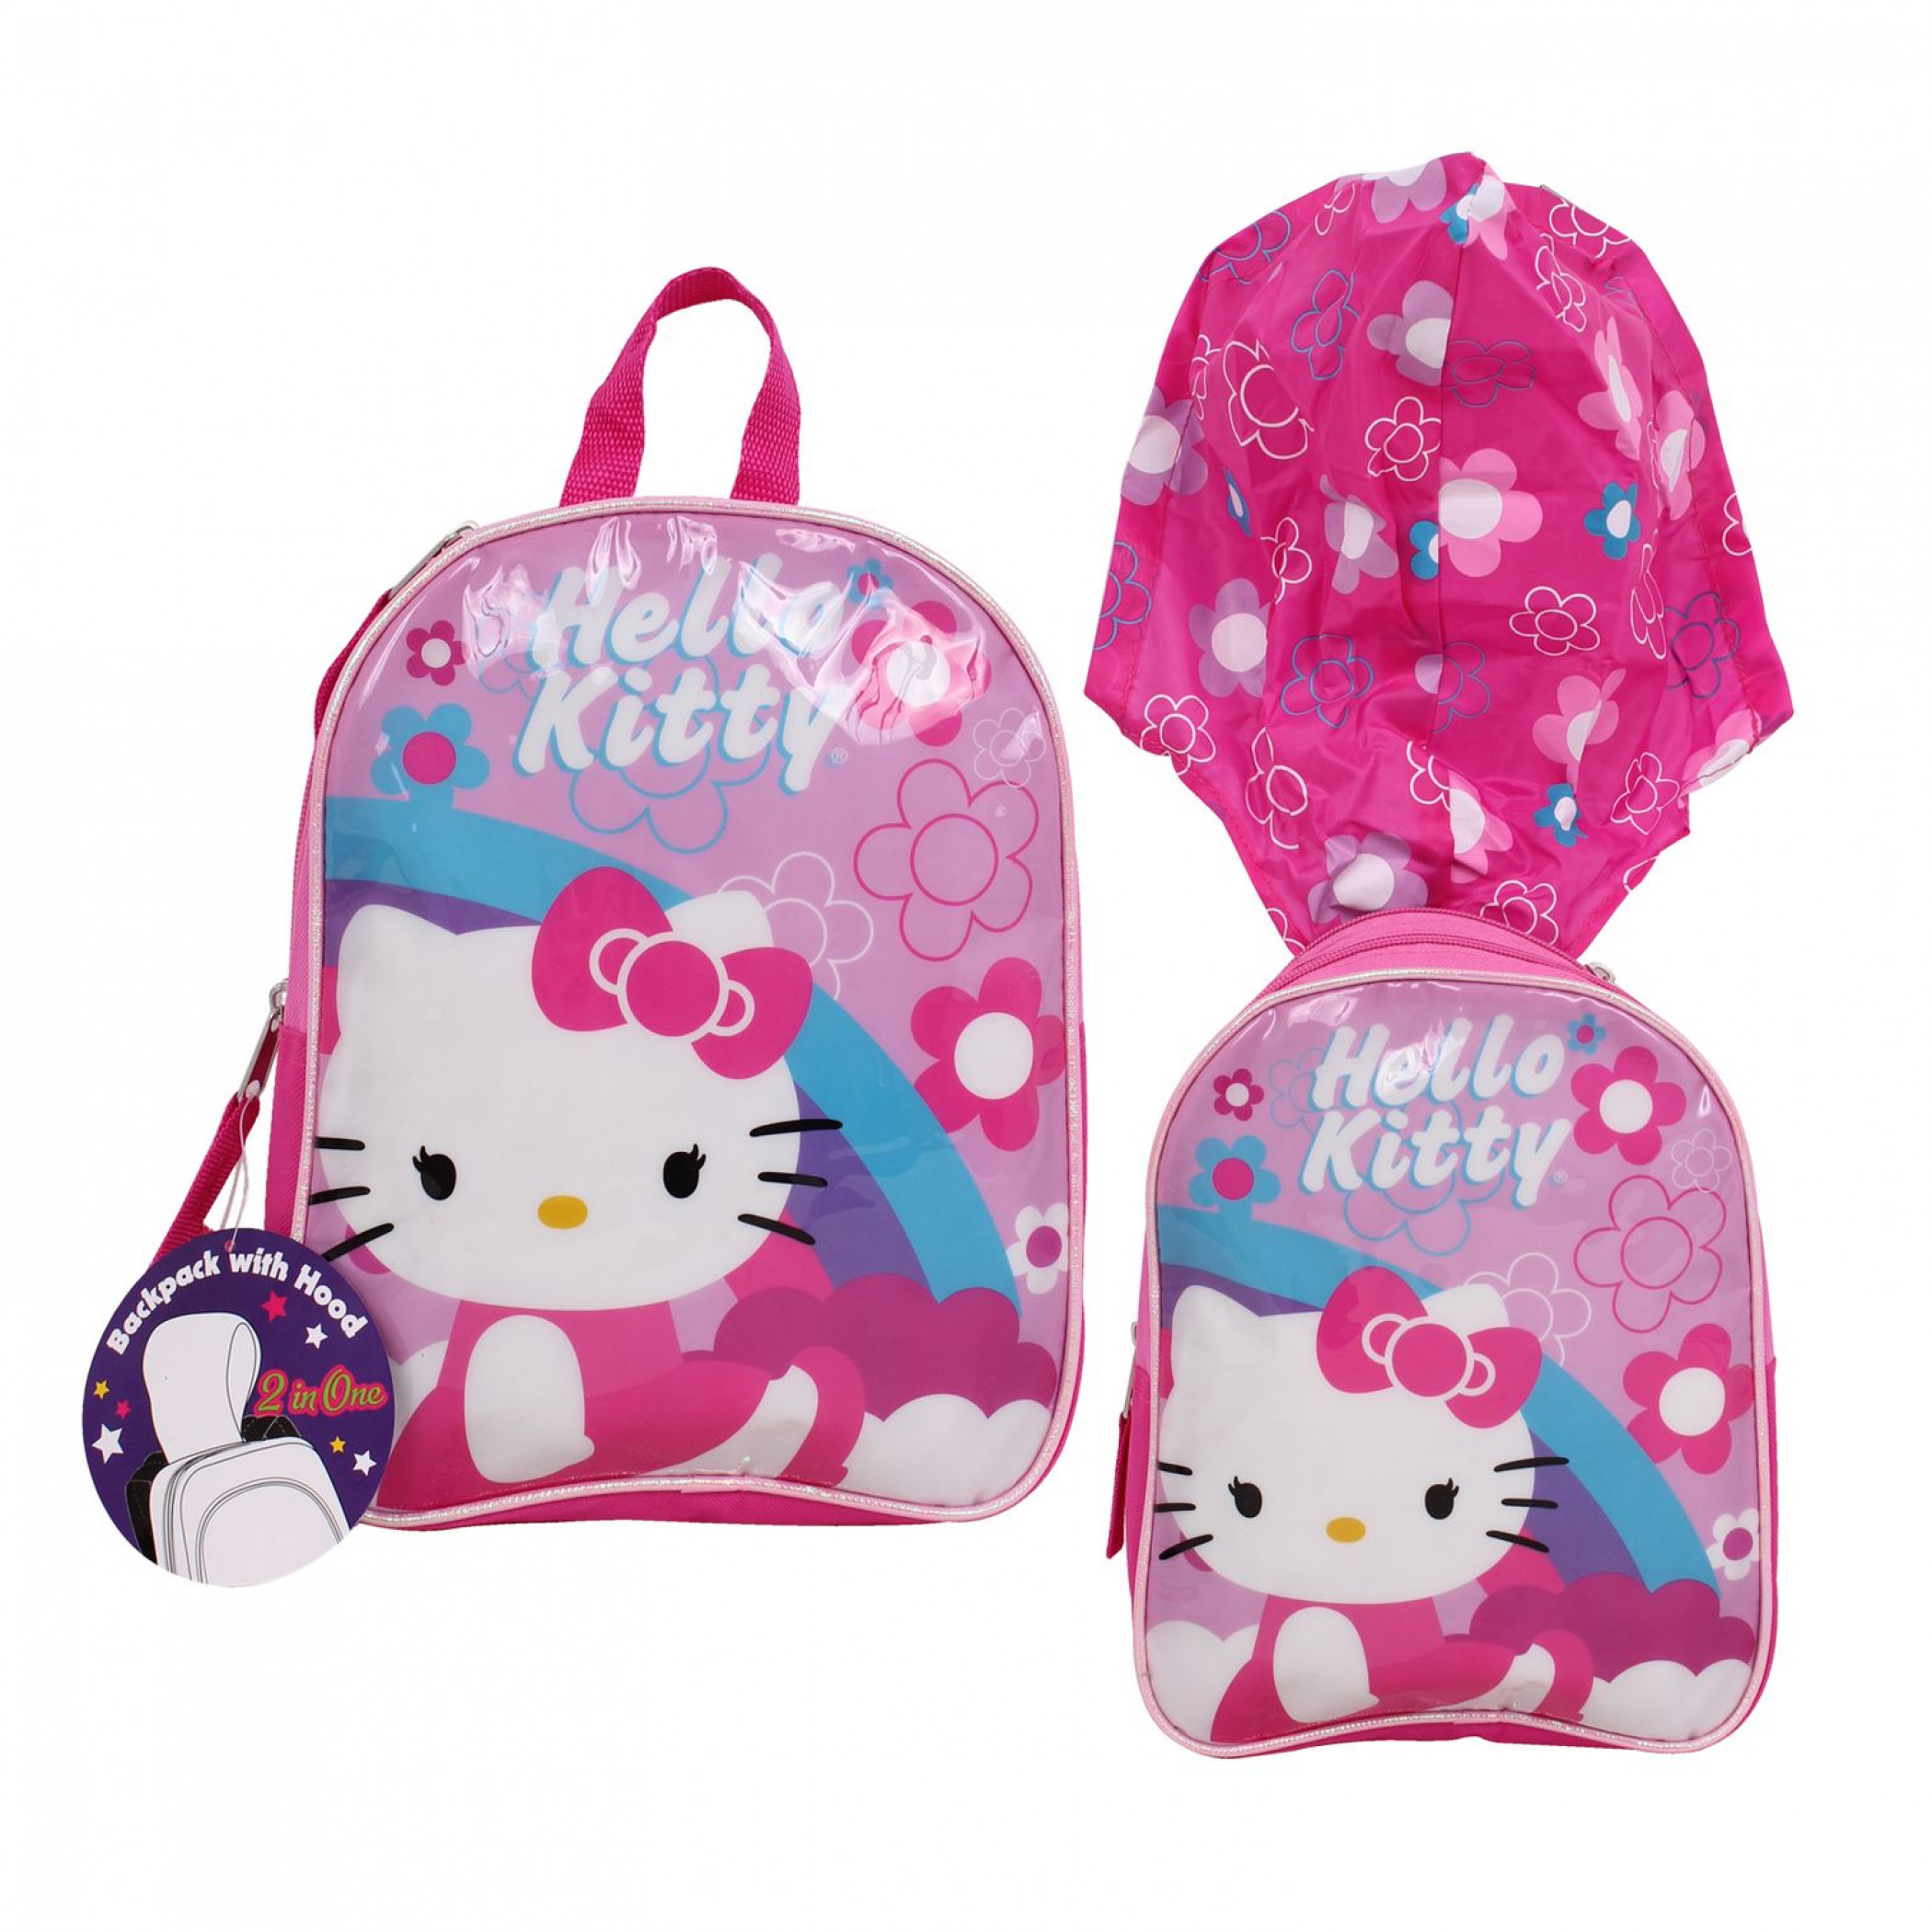 Hello Kitty Youth Backpack with Hood - image 1 of 3